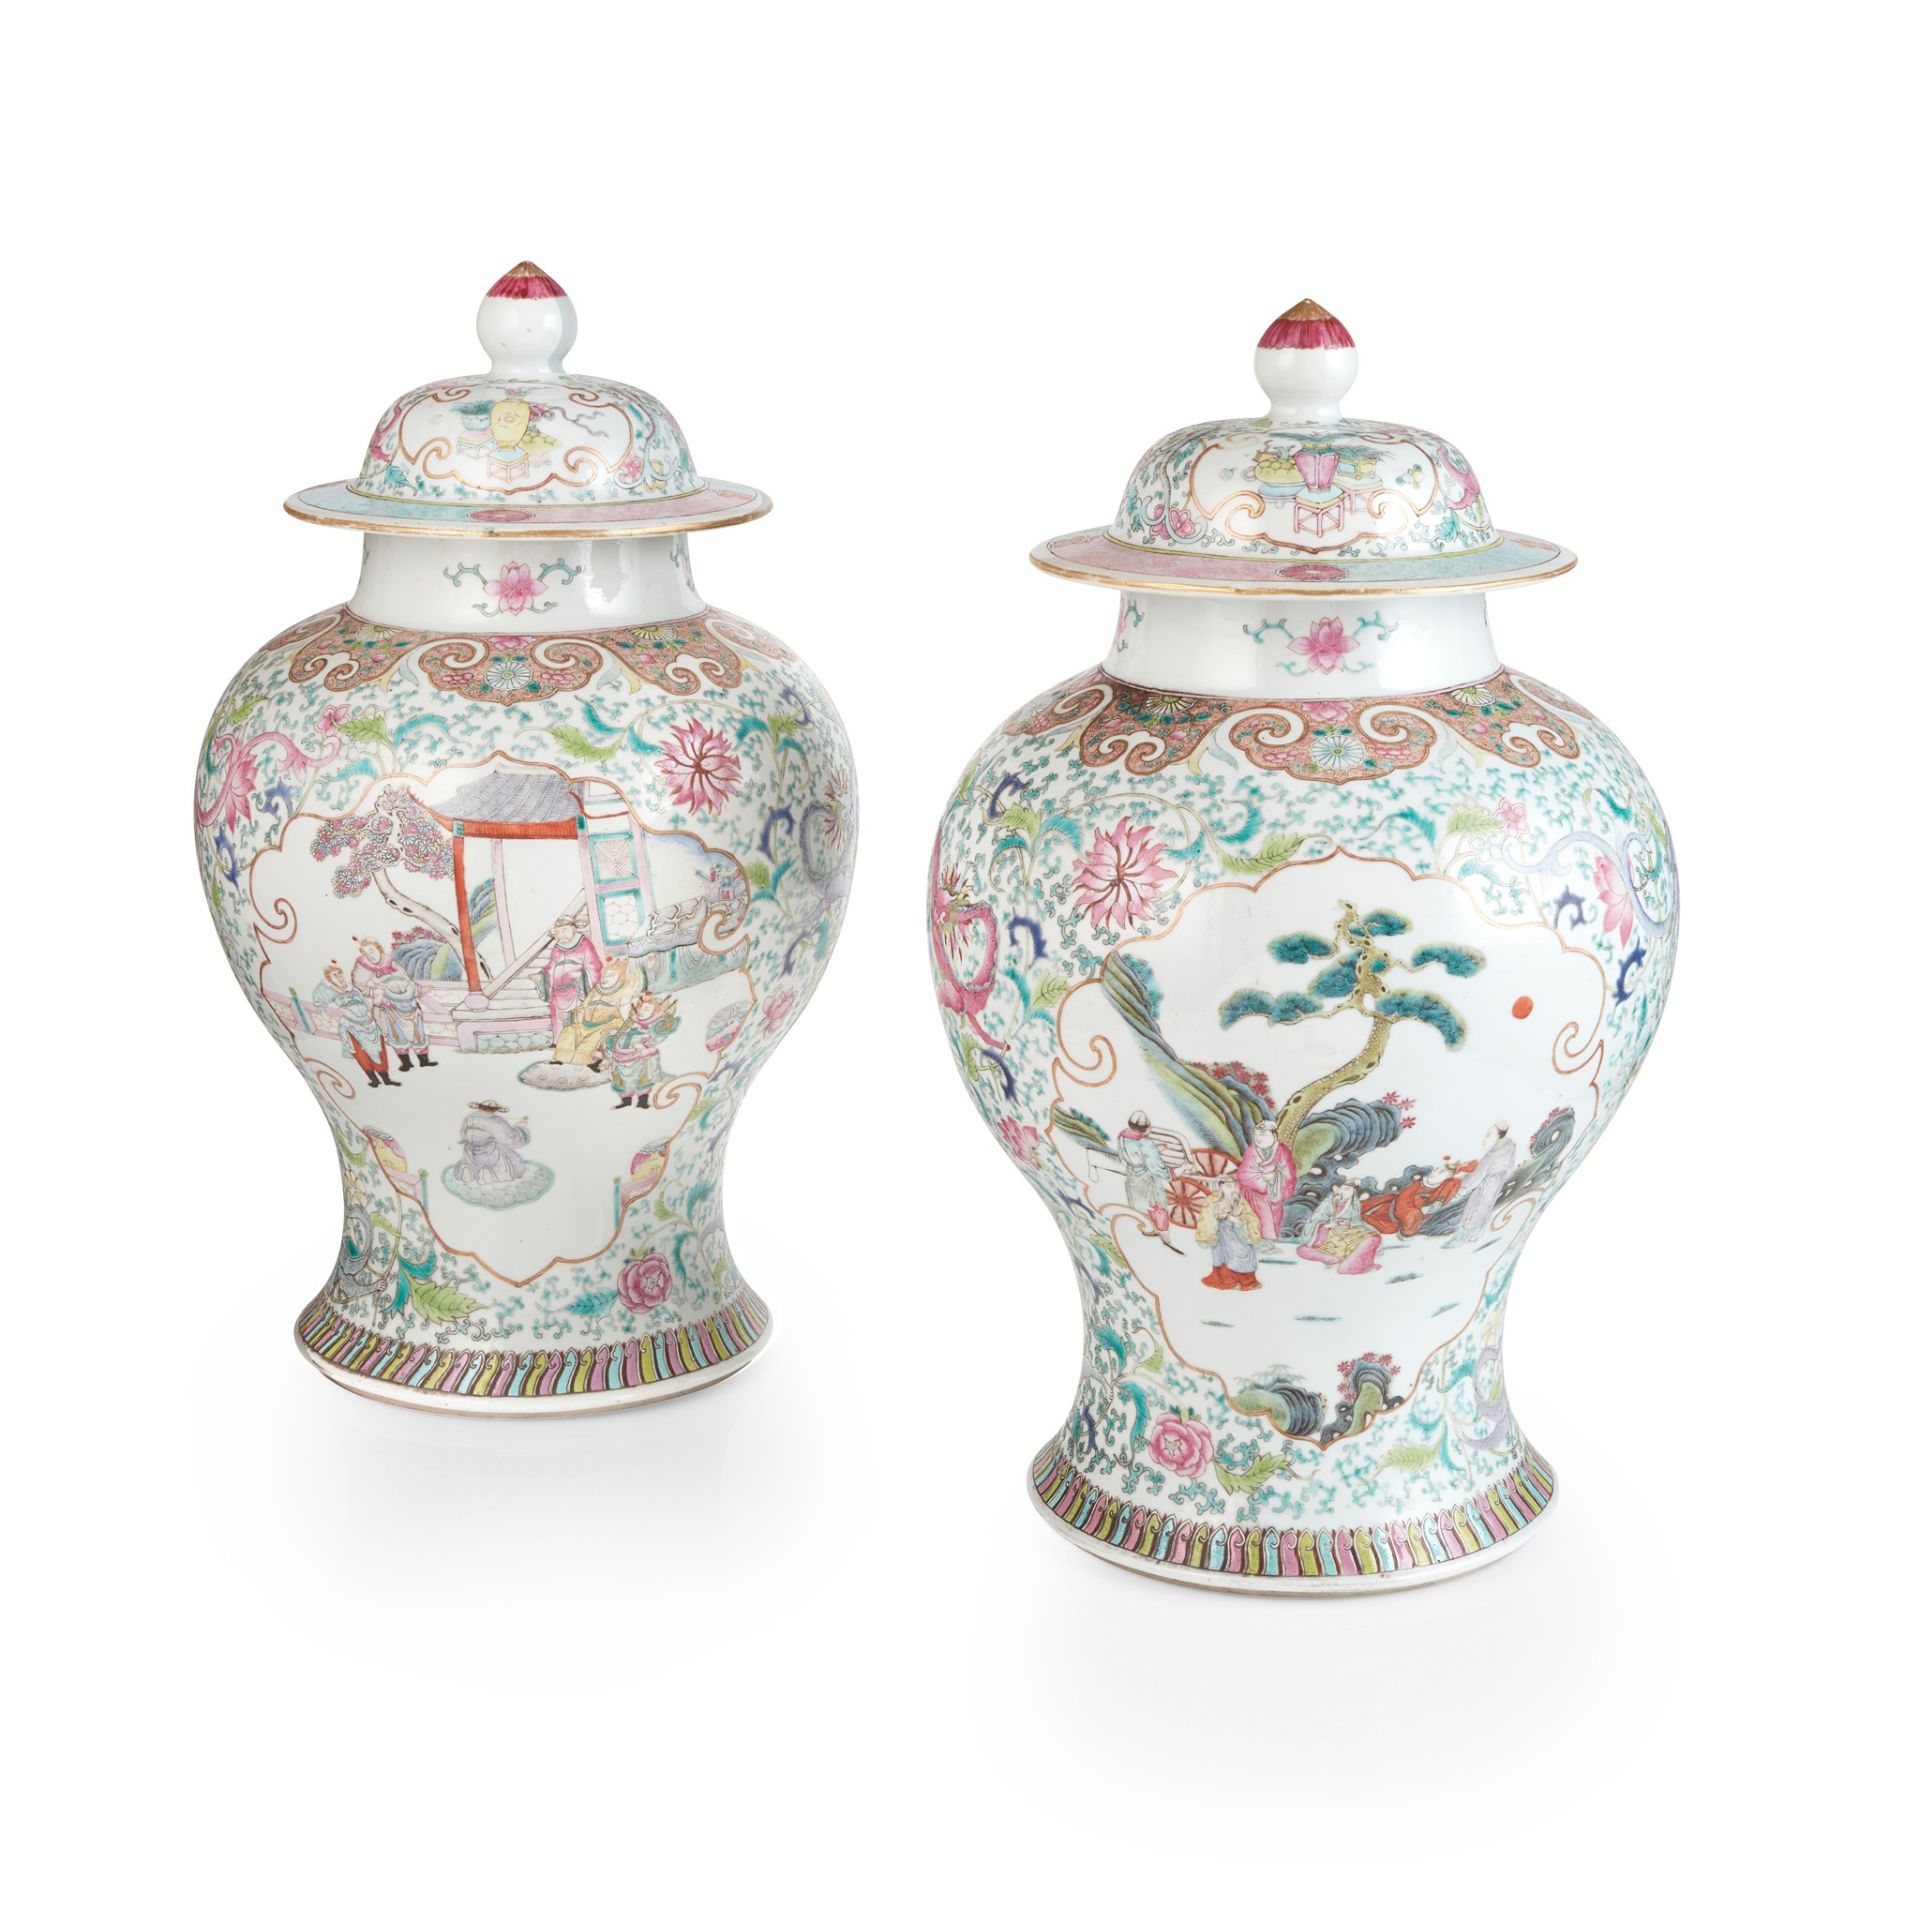 PAIR OF FAMILLE ROSE BALUSTER VASES WITH COVERS QIANLONG MARK BUT 19TH-20TH CENTURY